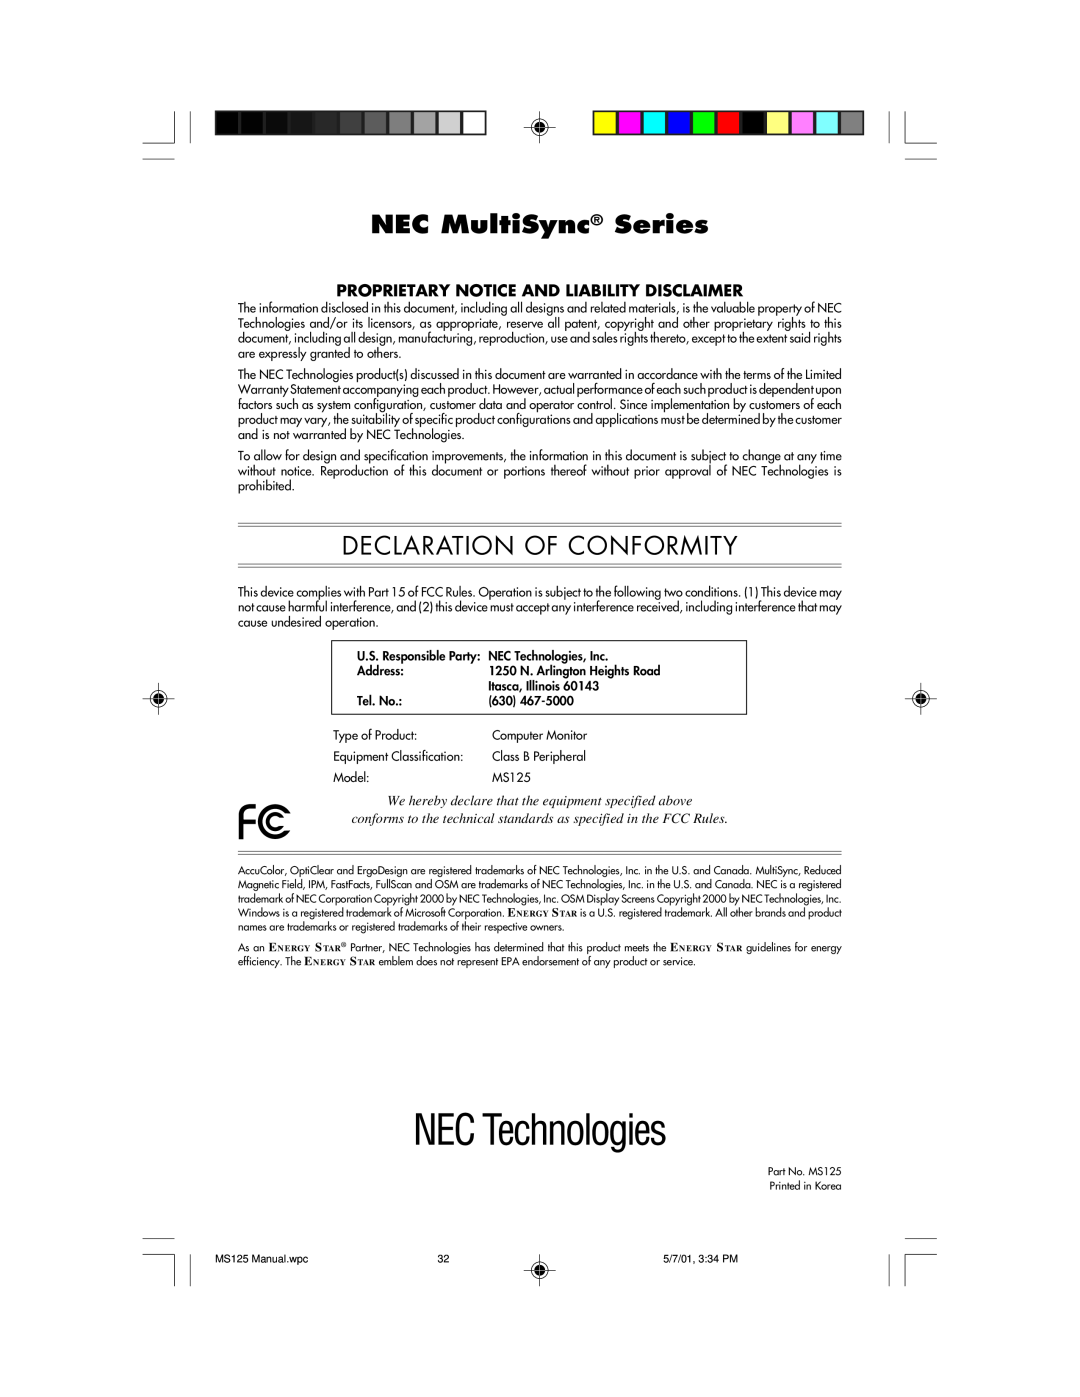 NEC MS125 manual NEC MultiSync Series, Declaration Of Conformity, Proprietary Notice And Liability Disclaimer 